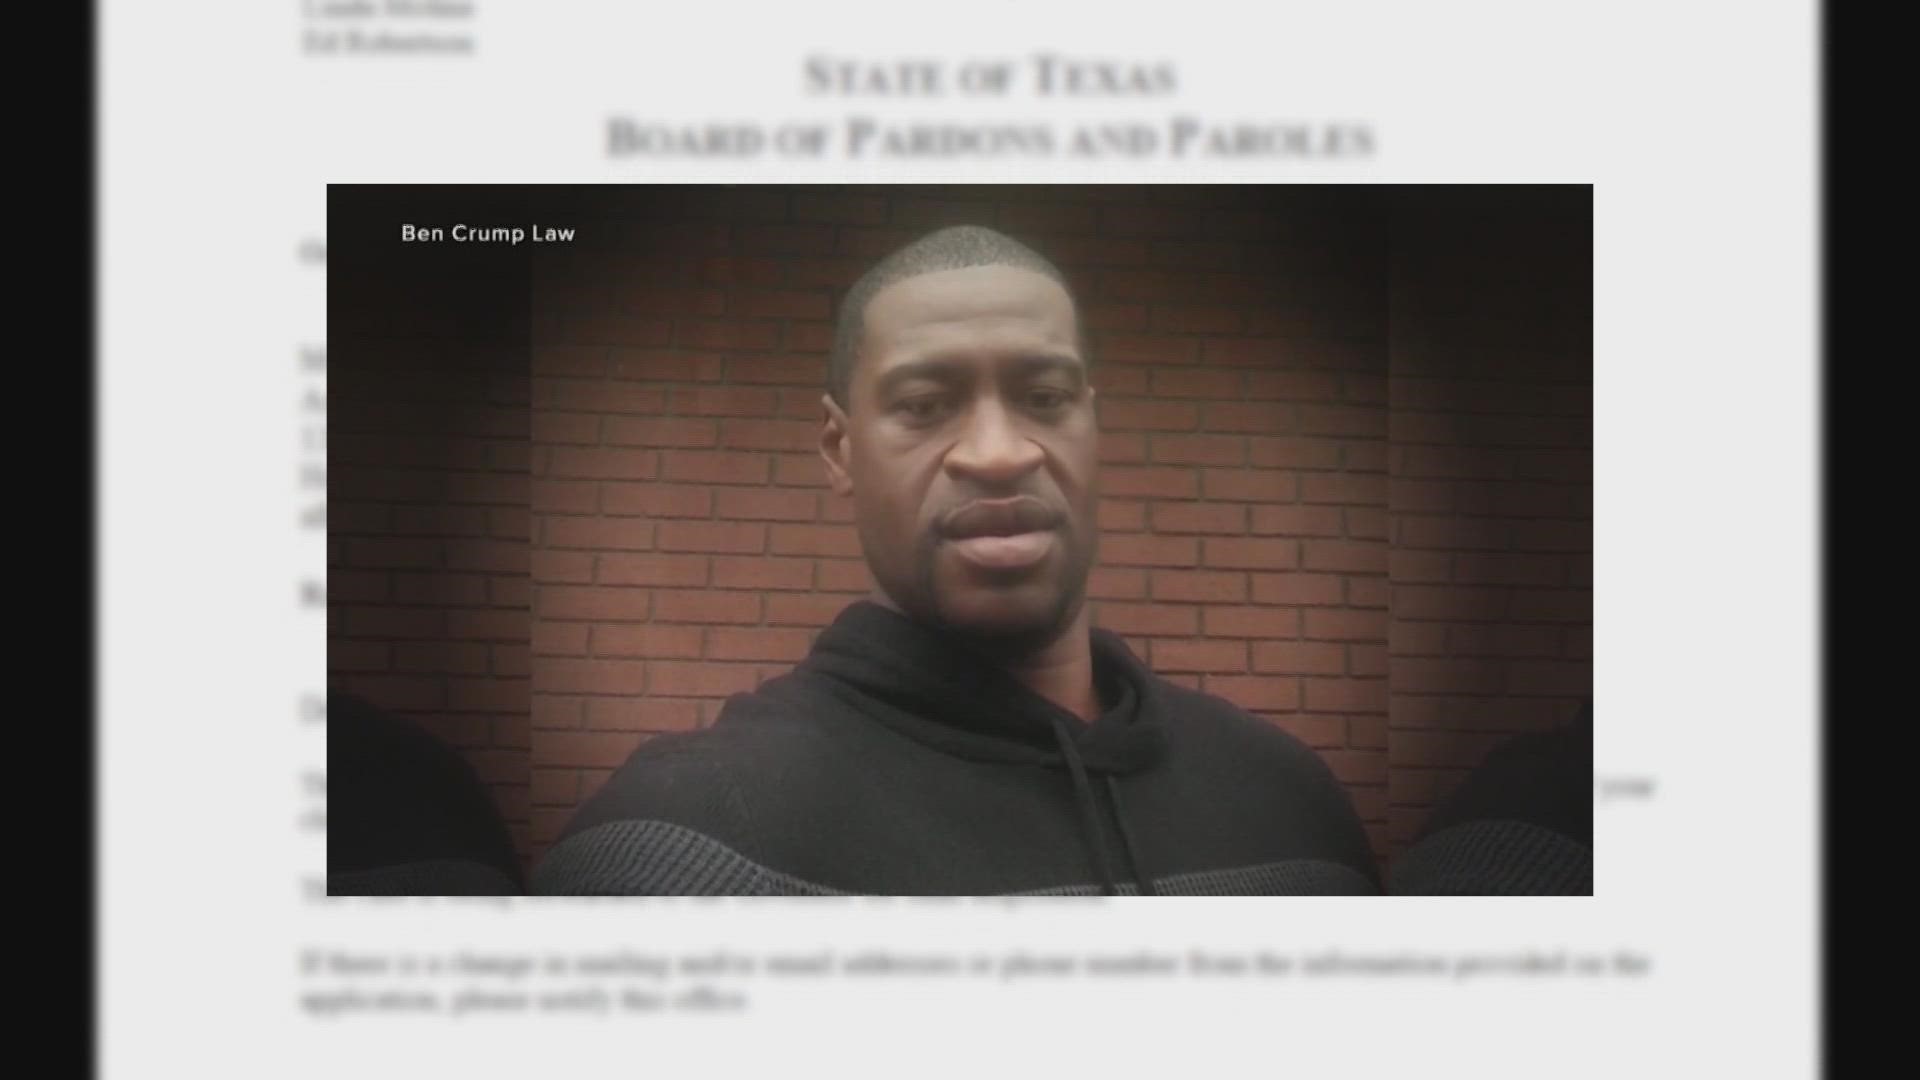 No action has taken place since the Texas Board of Pardons and Paroles voted unanimously to pardon George Floyd for a wrongful conviction in 2004.